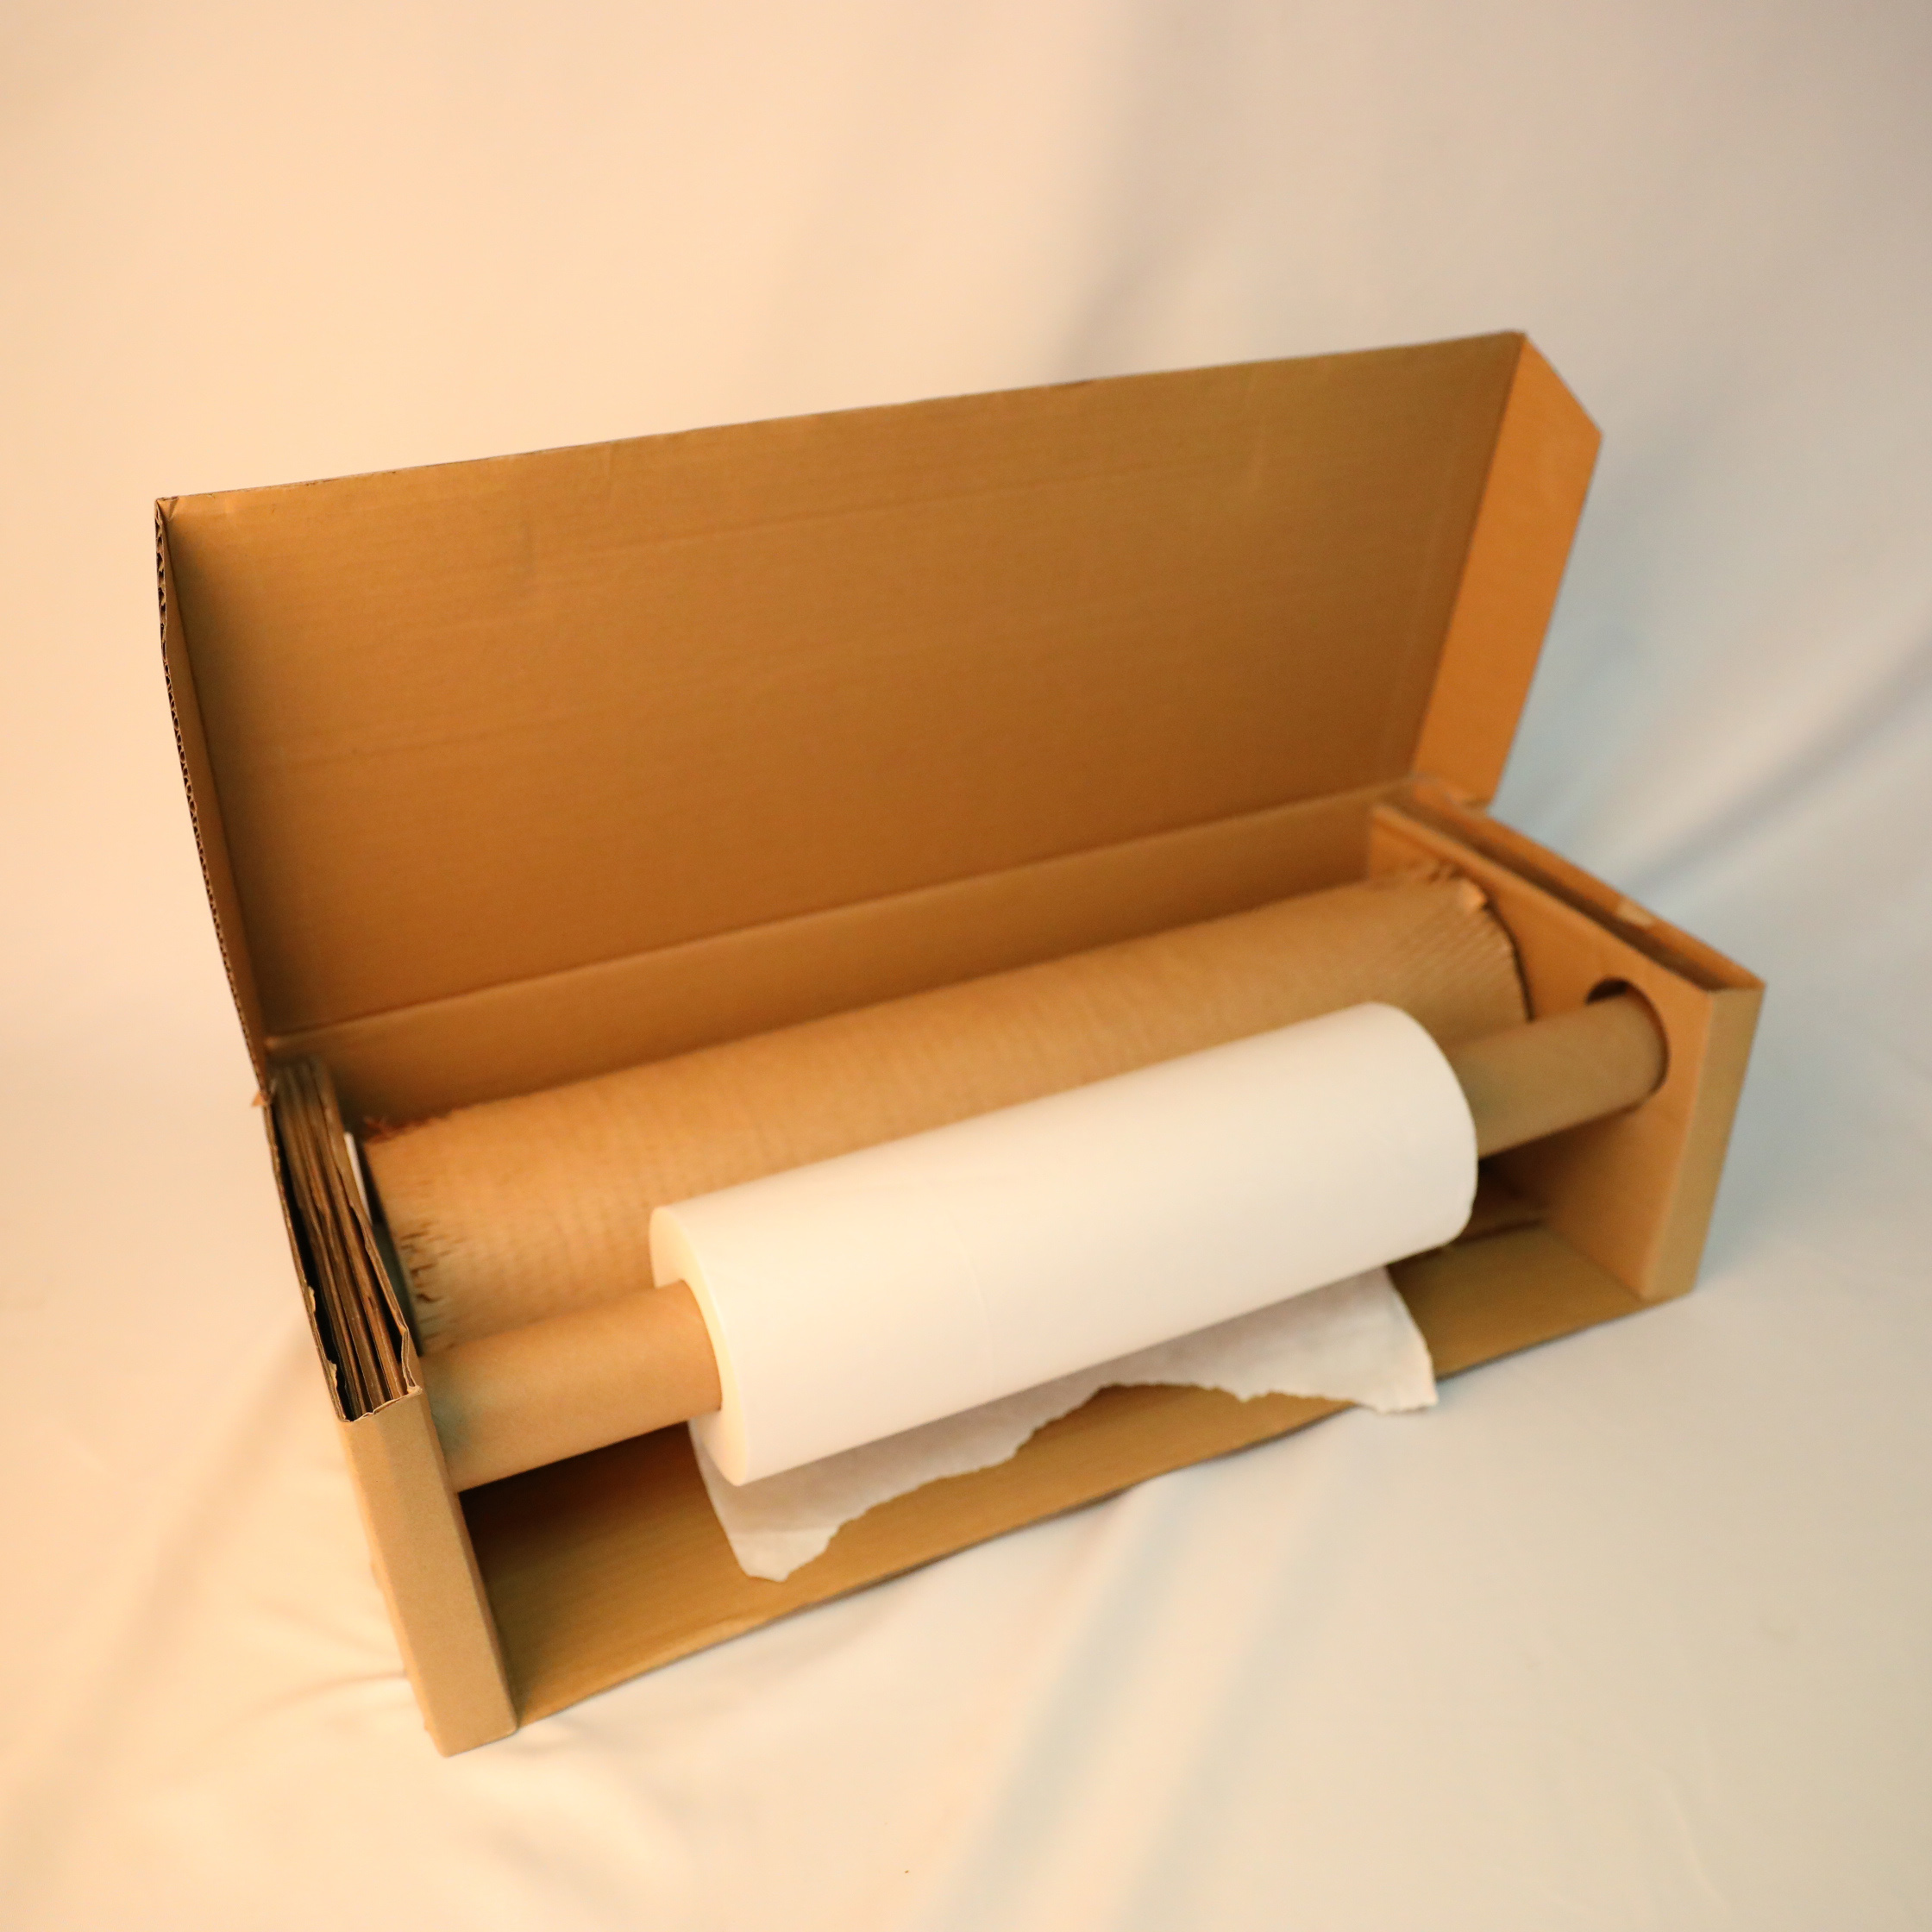 High Quality Honeycomb Paper Rolls for packaging